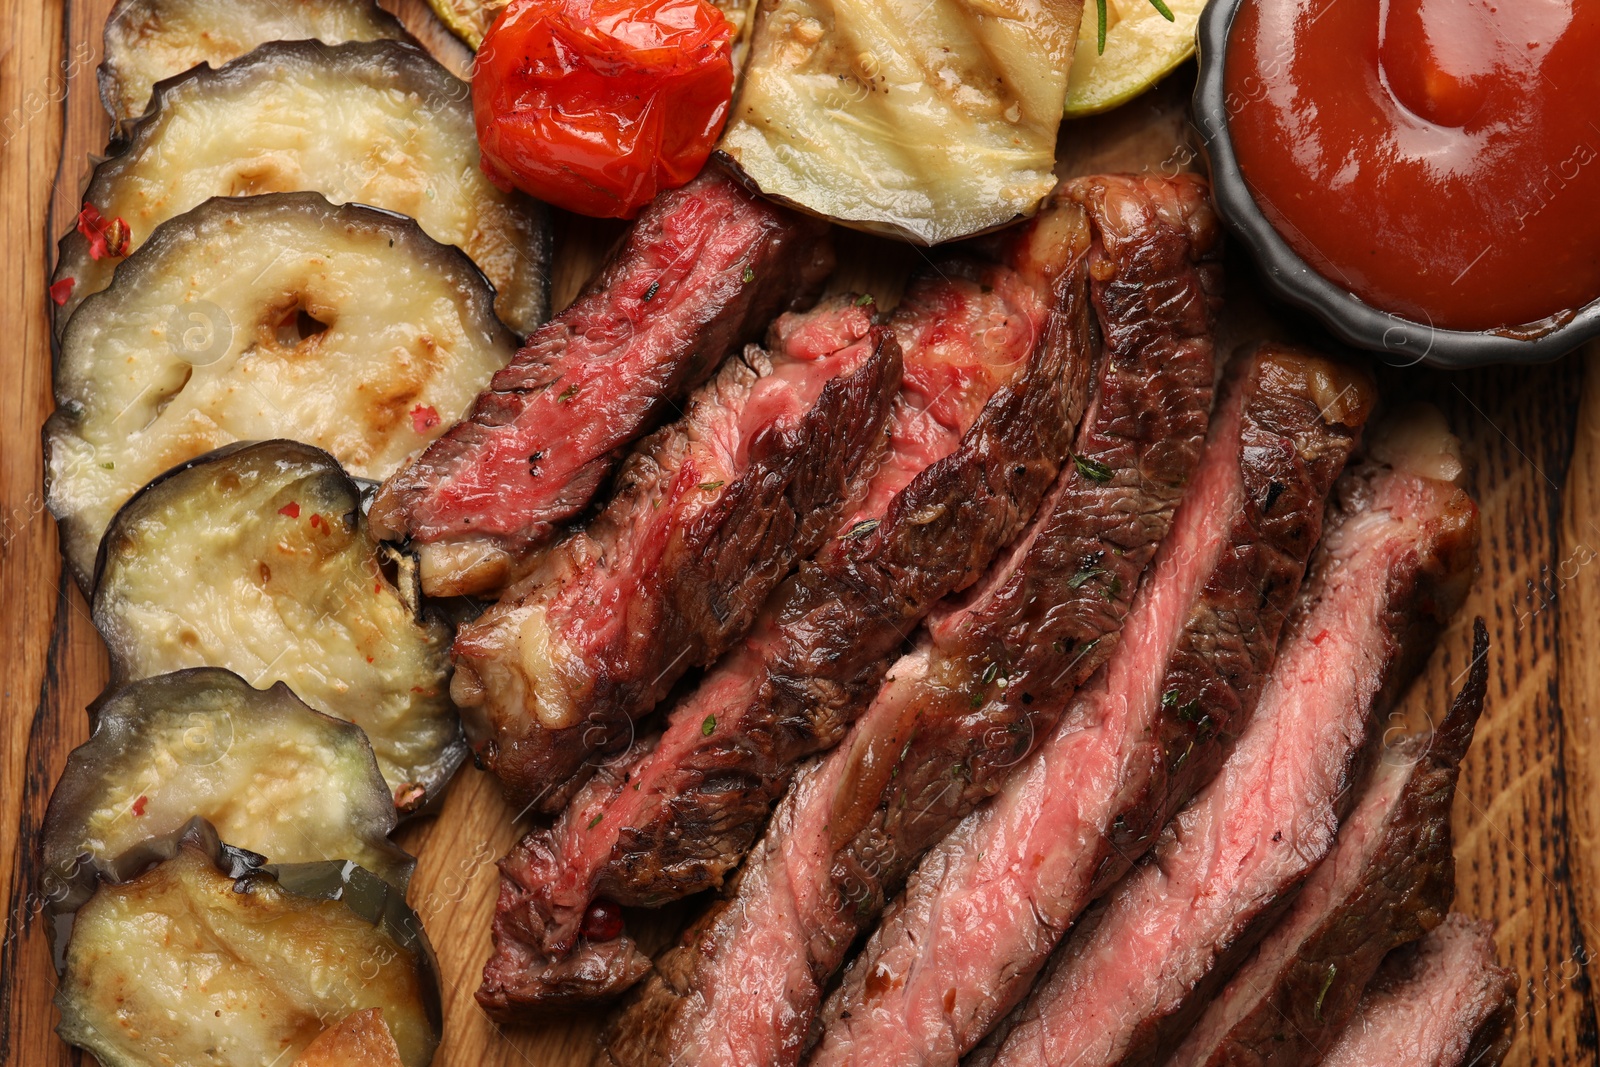 Photo of Delicious grilled beef with vegetables and tomato sauce on wooden table, top view